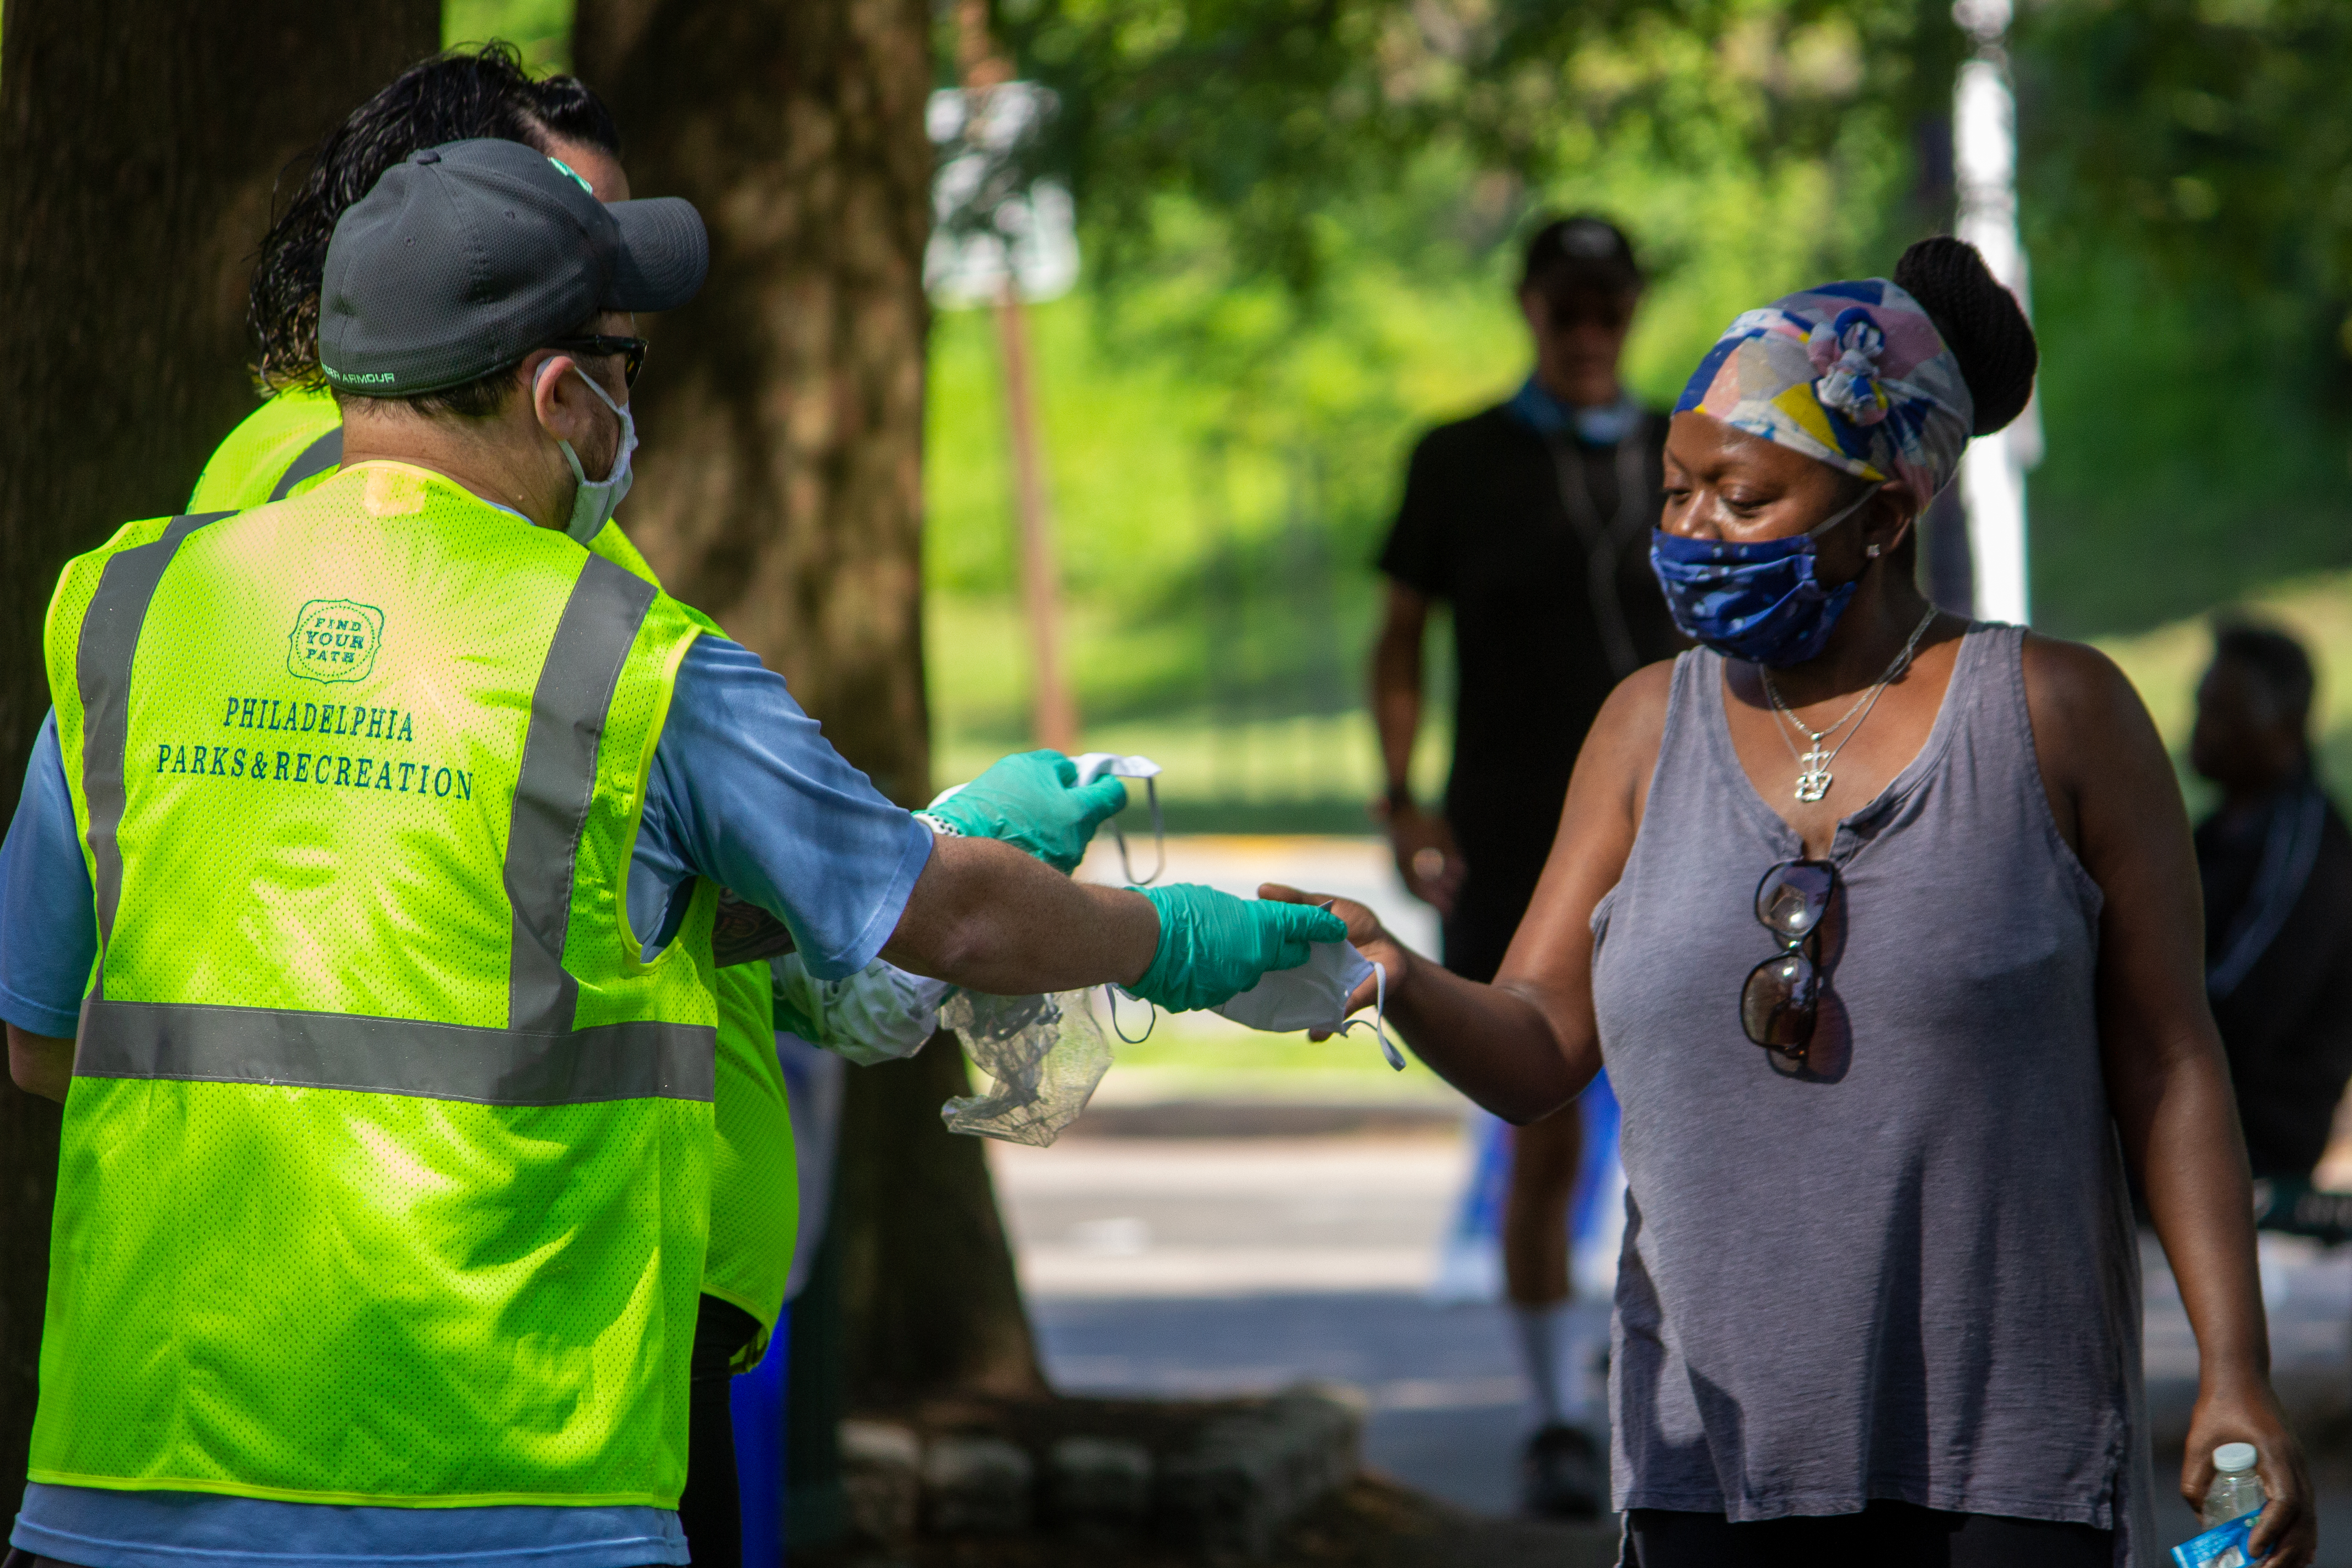 A man in a yellow Philadelphia Parks & Recreation vest handing a mask to a woman in a park. 